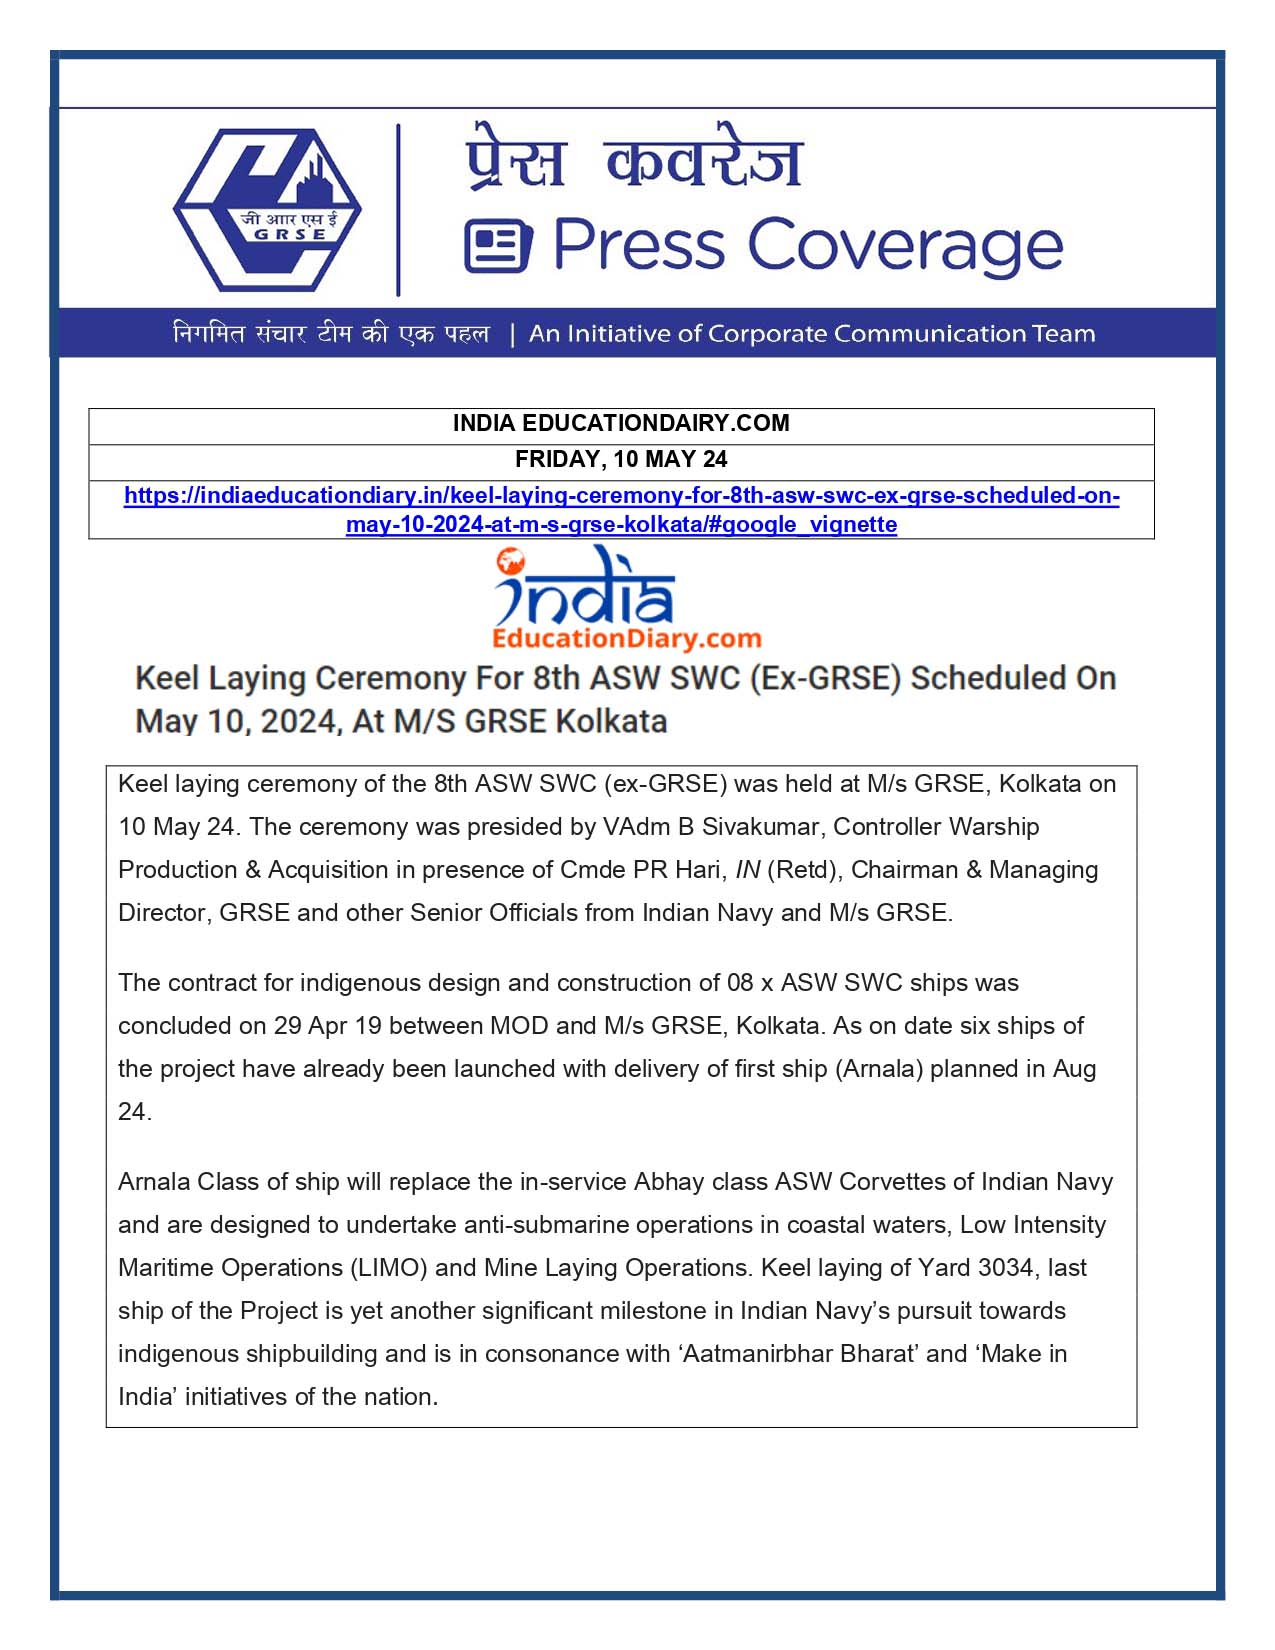 Press Coverage : Indian Education Diary, 10 May 24 : Keel Laying Ceremony of 8th Anti-Submarine Warfare Shallow Water Craft scheduled on 10 May 24 at M/S GRSE Kolkata